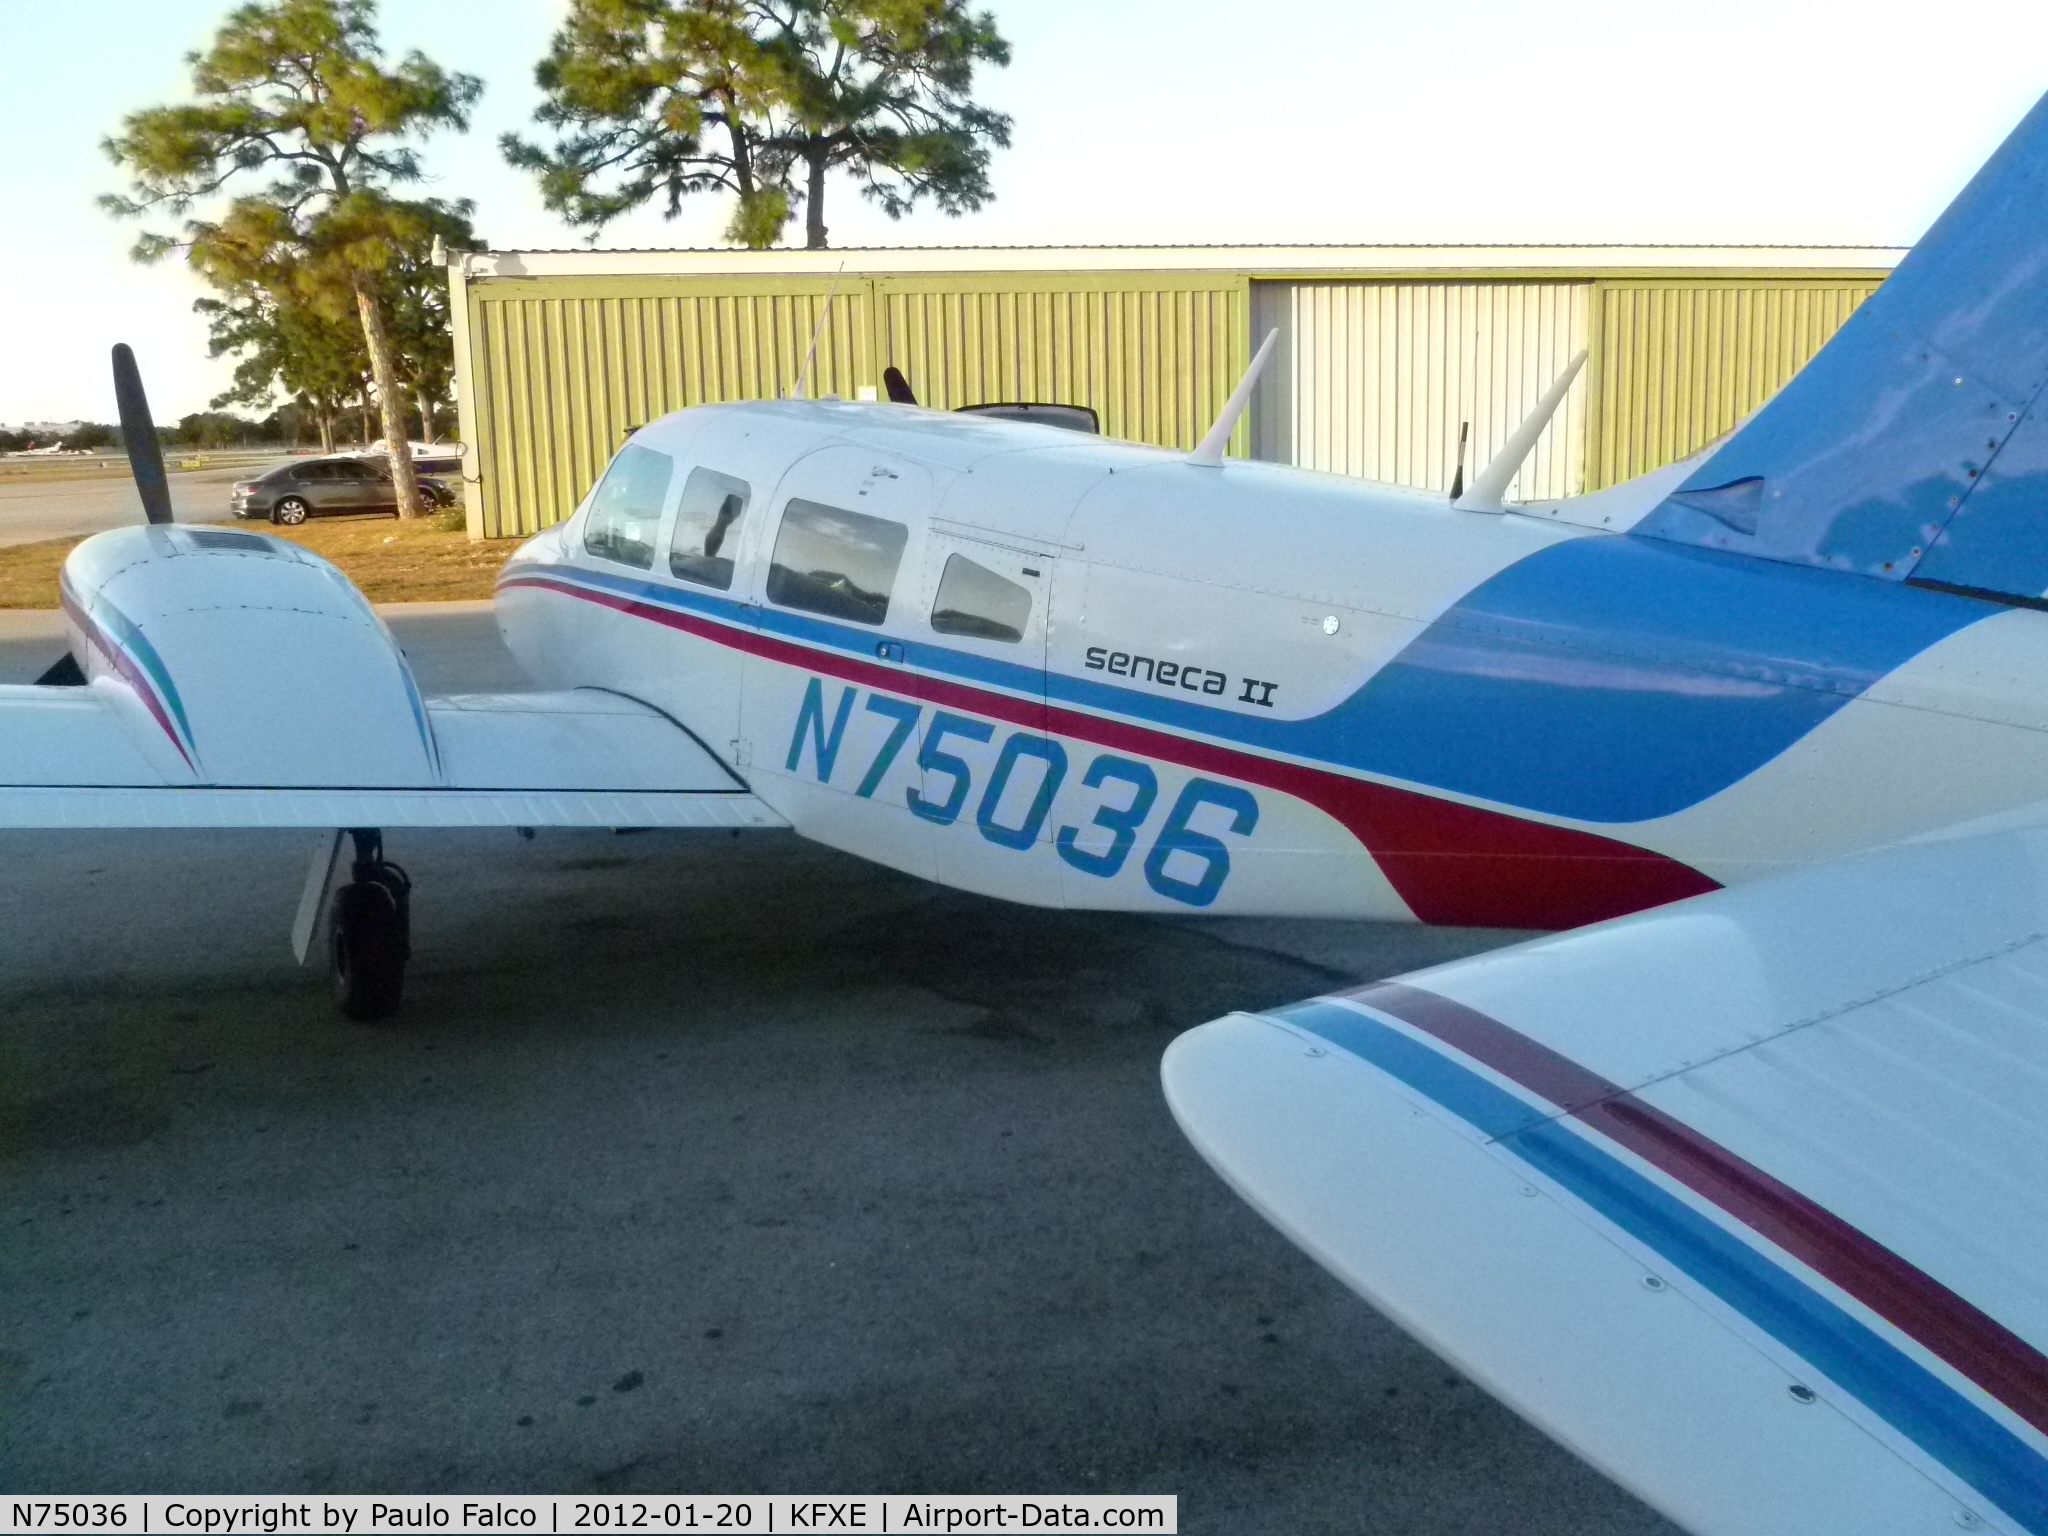 N75036, 1976 Piper PA-34-200T C/N 34-7670218, N75036 at KFXE before delivery flight to new owner in Brazil as PR-EBF.